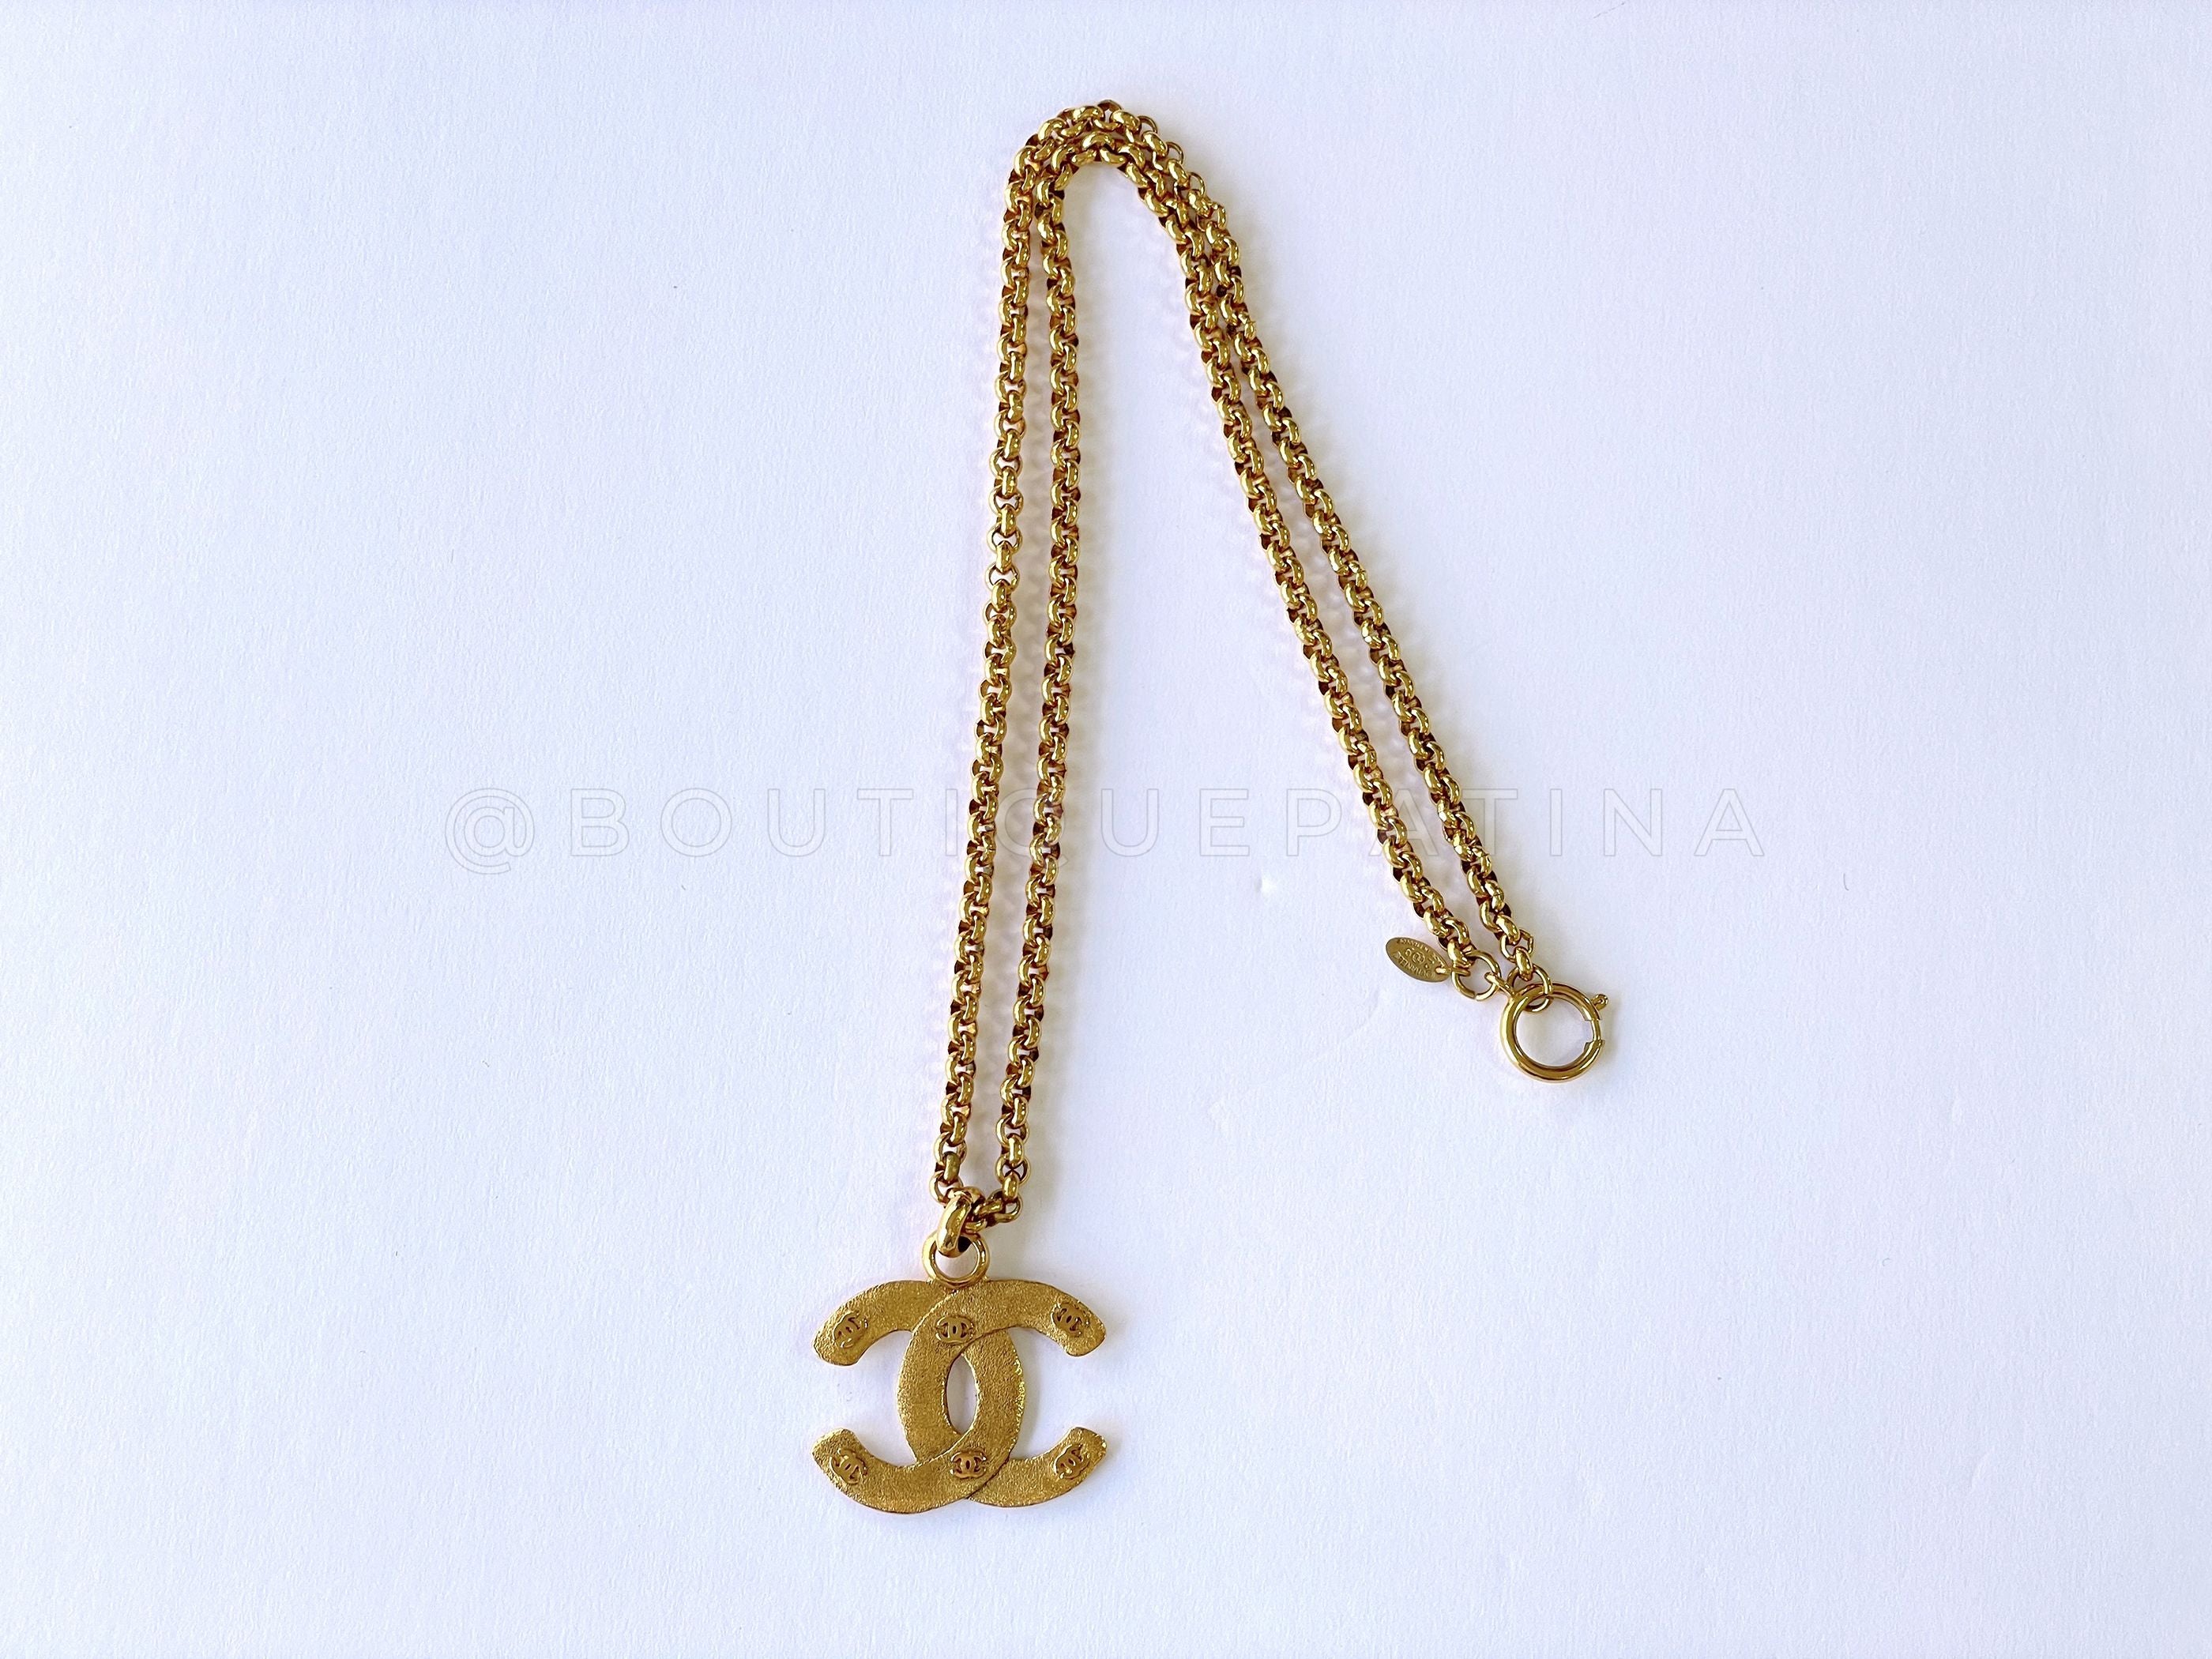 Chanel Vintage Collection 29 Brushed Logo Chain Necklace